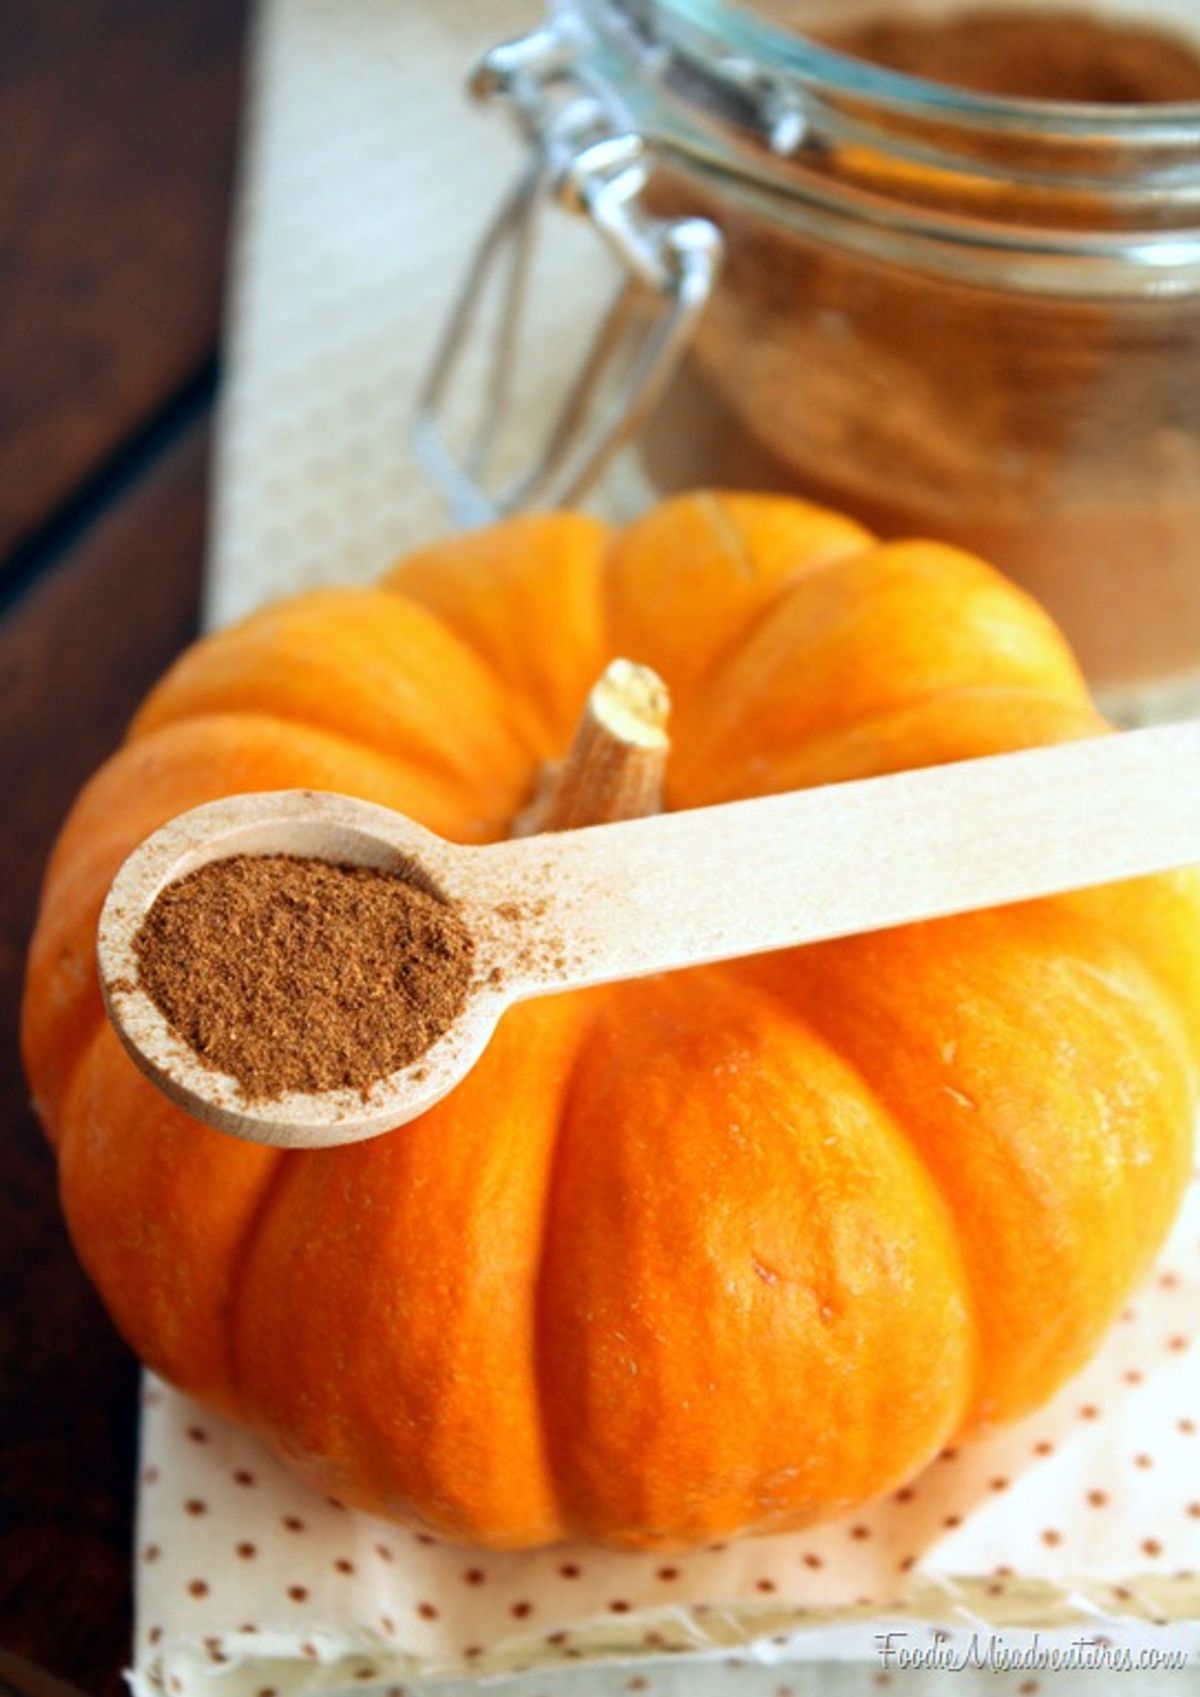 You Were Wrong: Pumpkin Spice Is Actually Good For Your Health